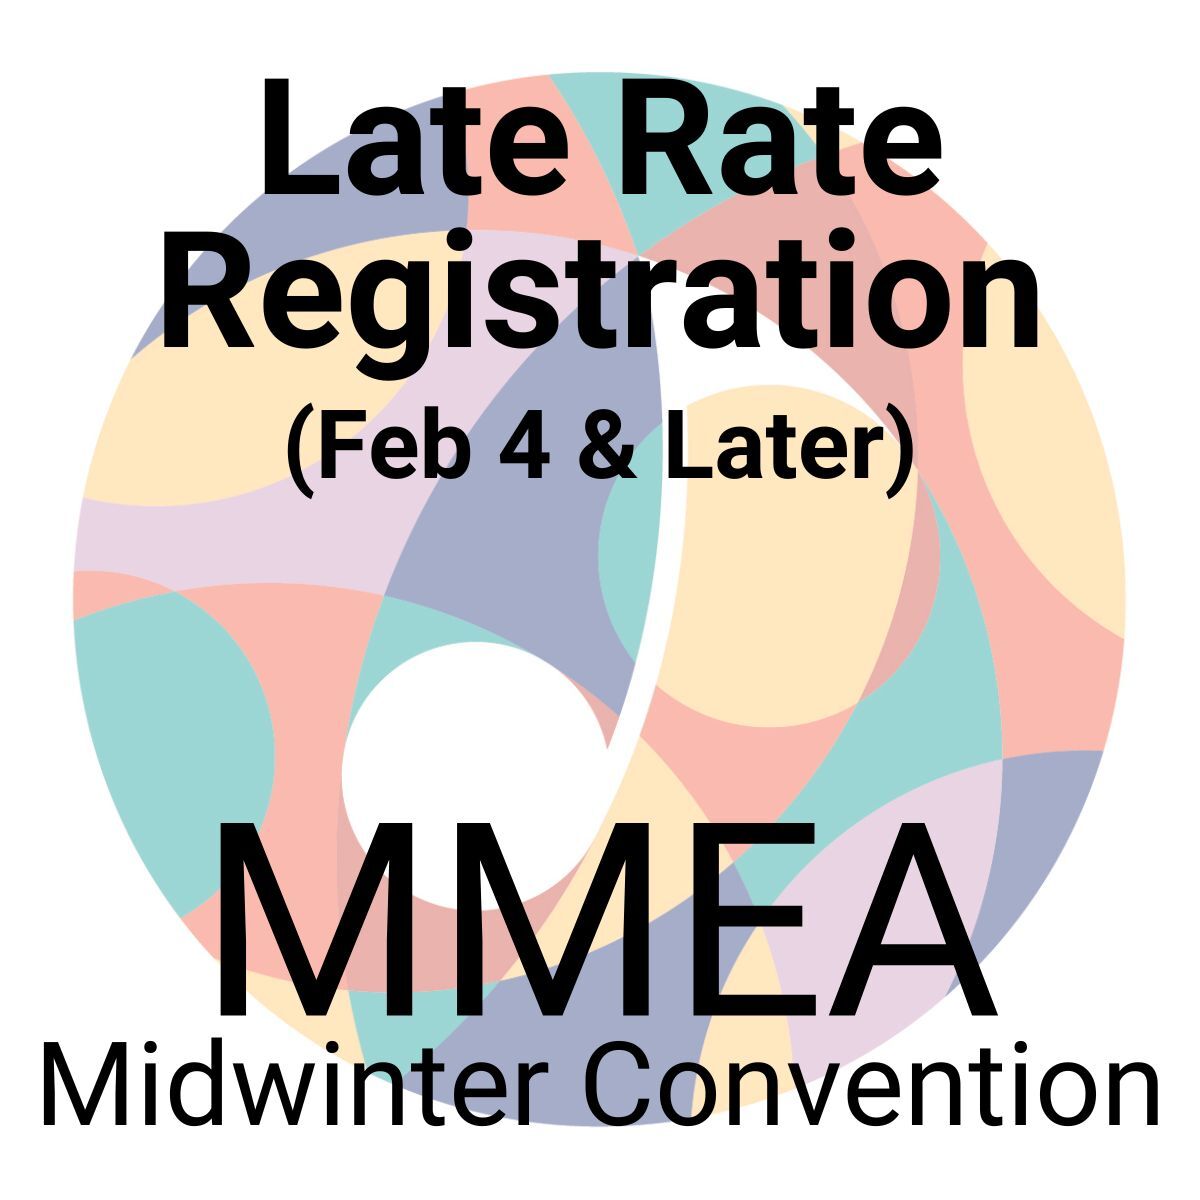 2023 Midwinter Convention Late Rate Registration (Feb 4 & Later